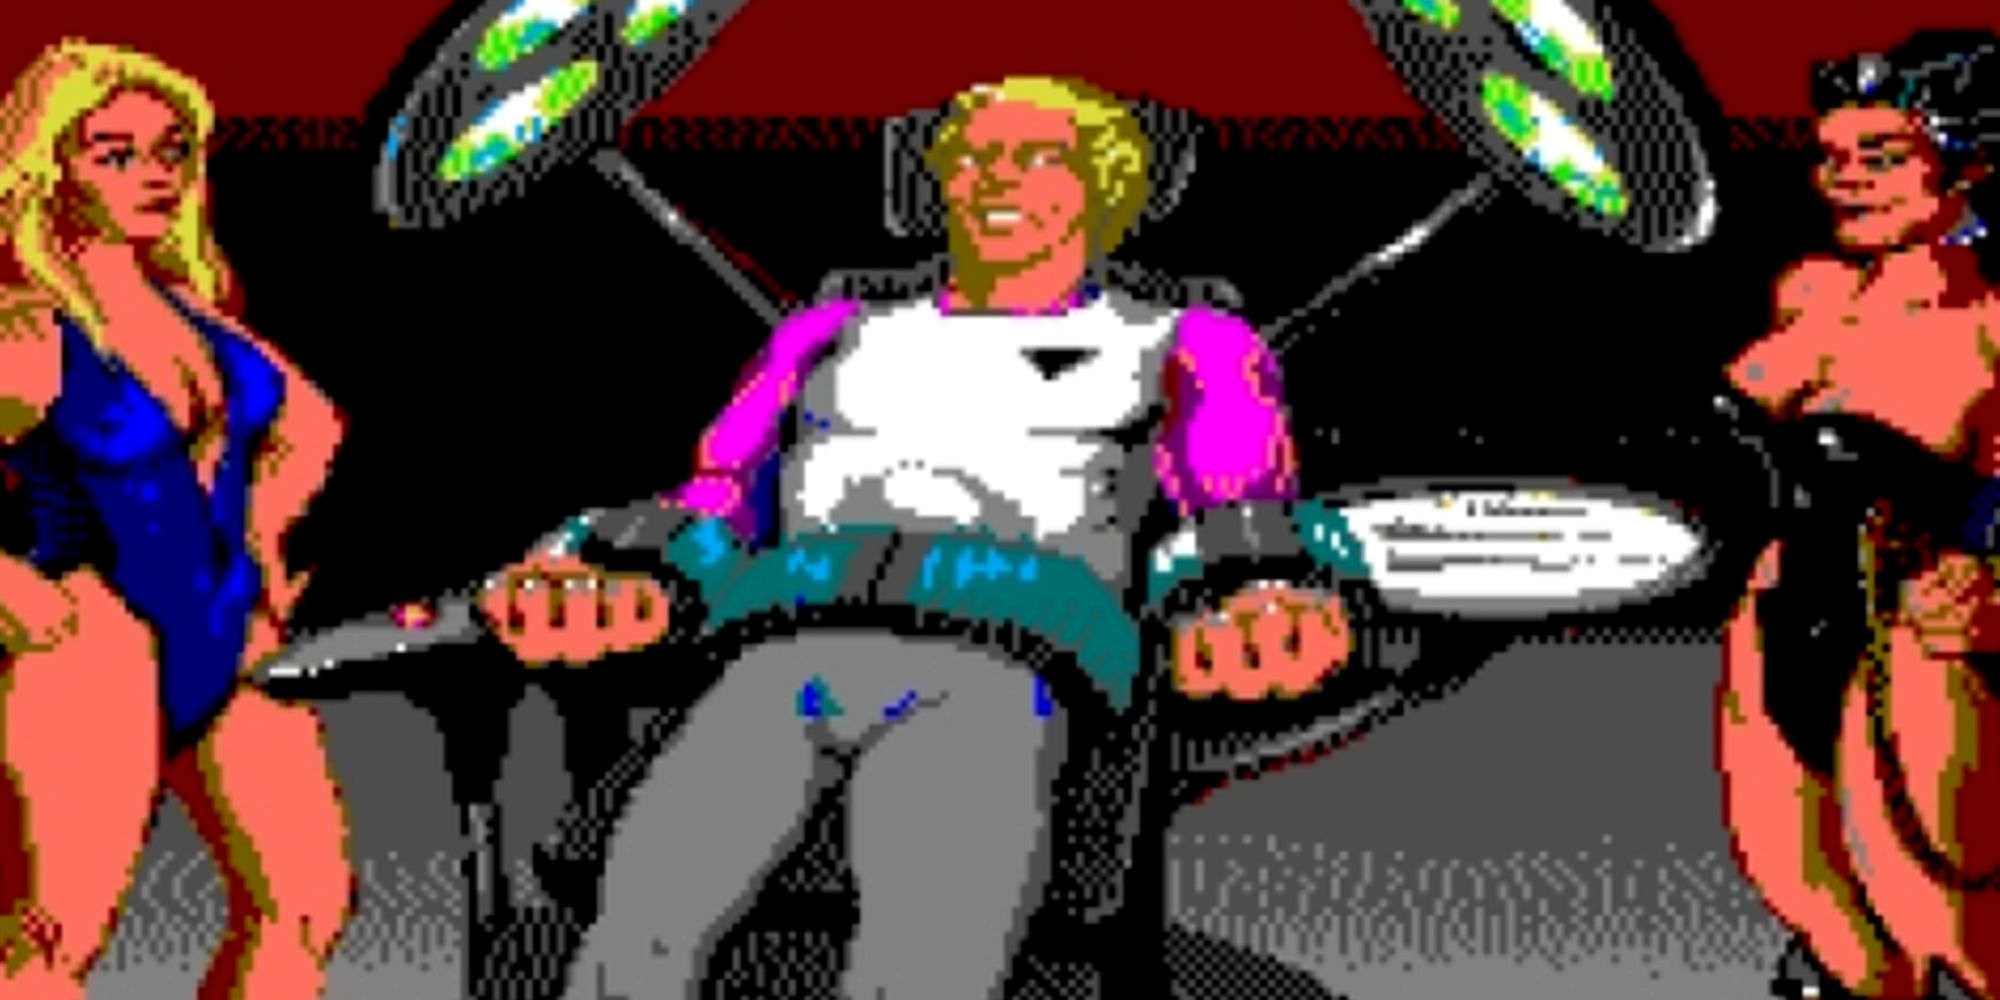 Image Showing Space Quest Main Character Roger Wilco Being Restrained By Two Women